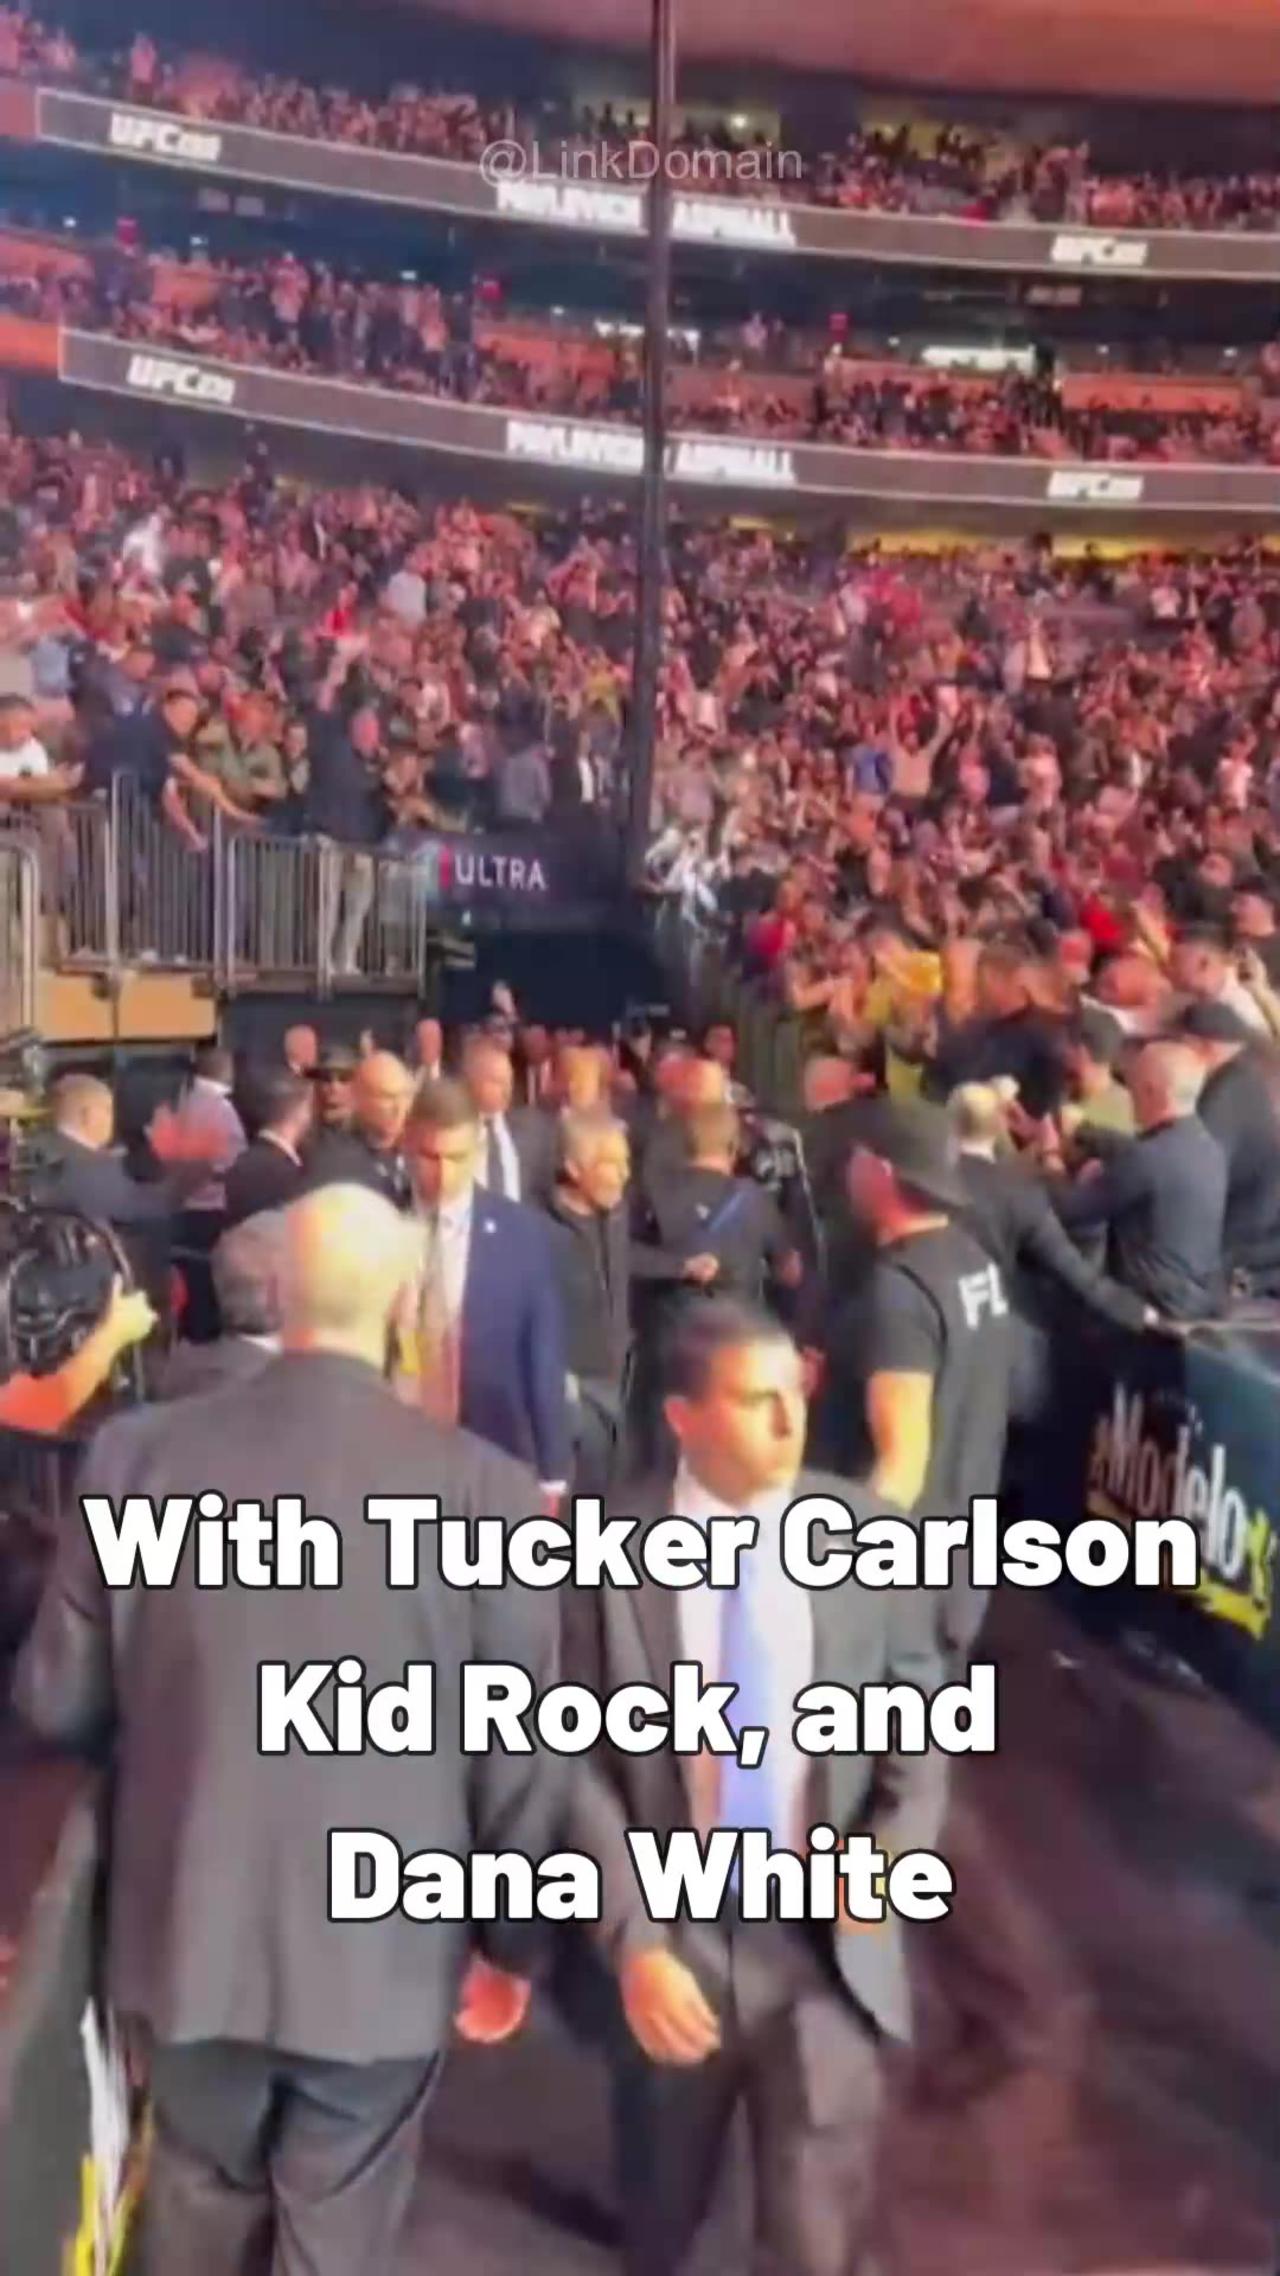 The UFC crowd erupts when Kid Rock, Tucker Carlson, and Donald Trump arrive ringside